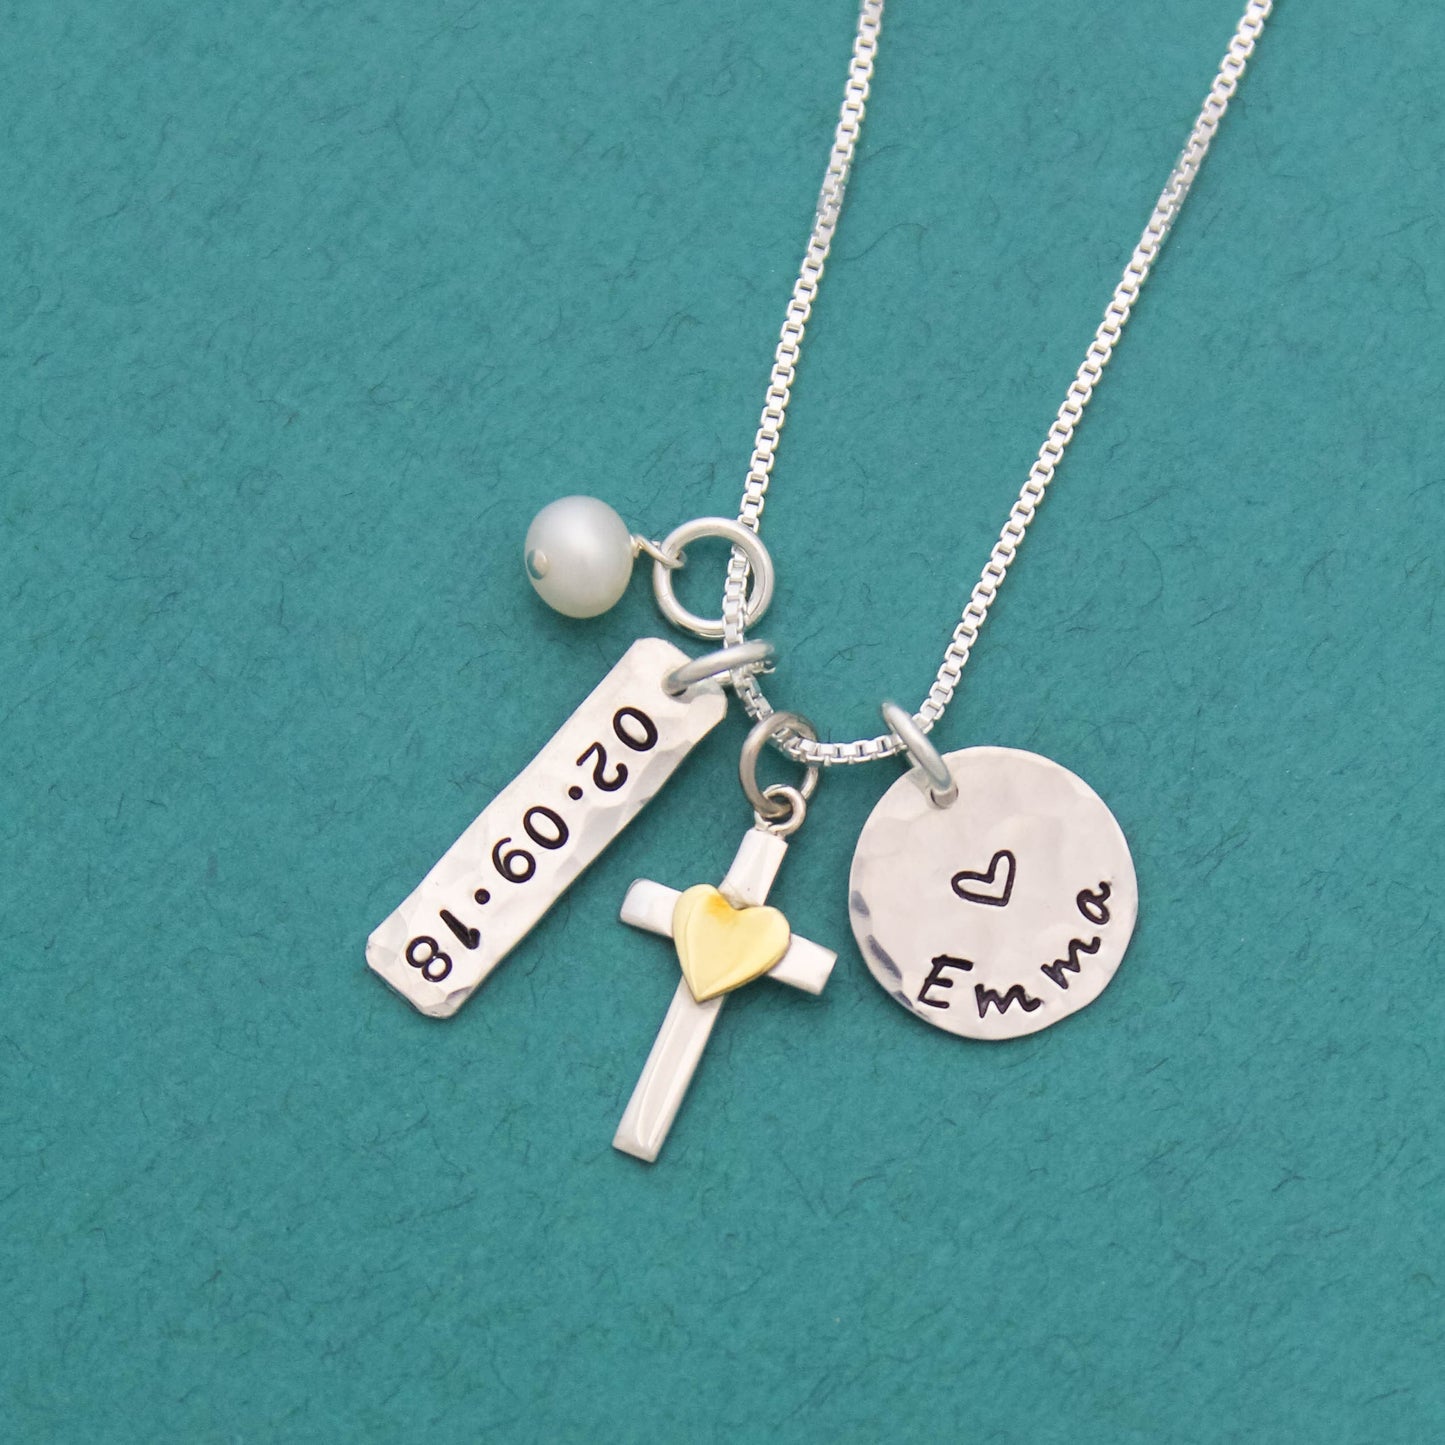 Personalized Cross Charm Necklace in Silver & Bronze, Confirmation Cross Necklace, First Communion Cross Necklace, Hand Stamped Jewelry